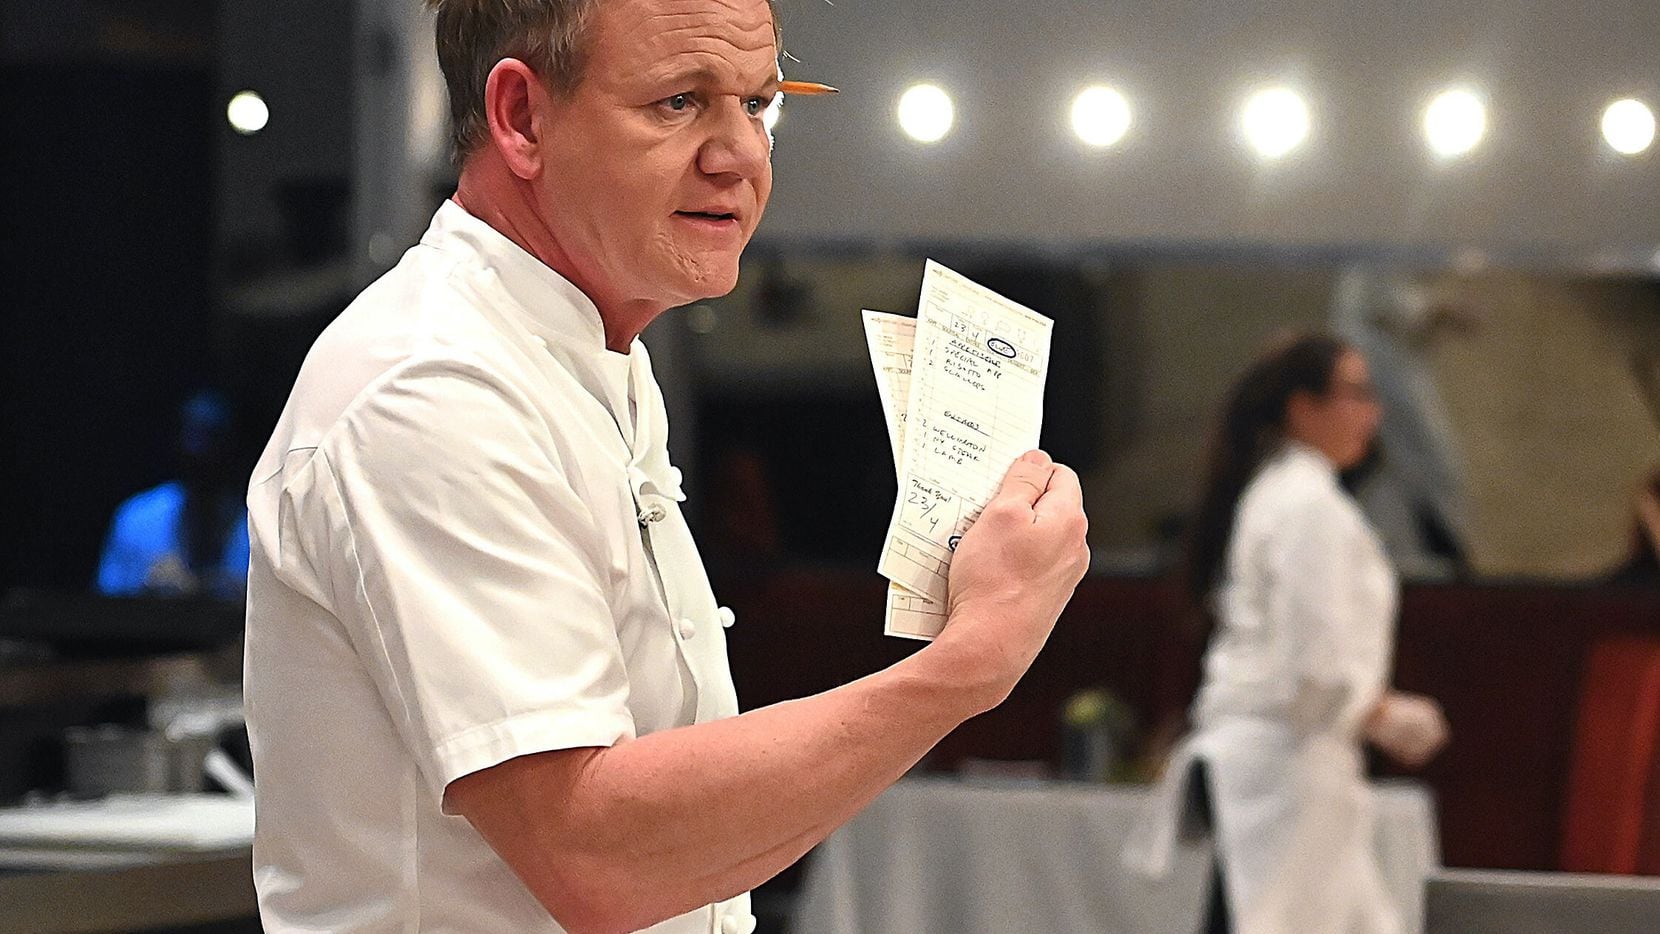 TV chef Gordon Ramsay is tough on contestants on Fox show "Hell's Kitchen." But at the end of each season, Ramsay hires the best chef to work in one of his restaurants. With his restaurant expansion business in the hands of Dallas CEO Norman Abdallah, Ramsay will have many more restaurants to staff in the next five years.